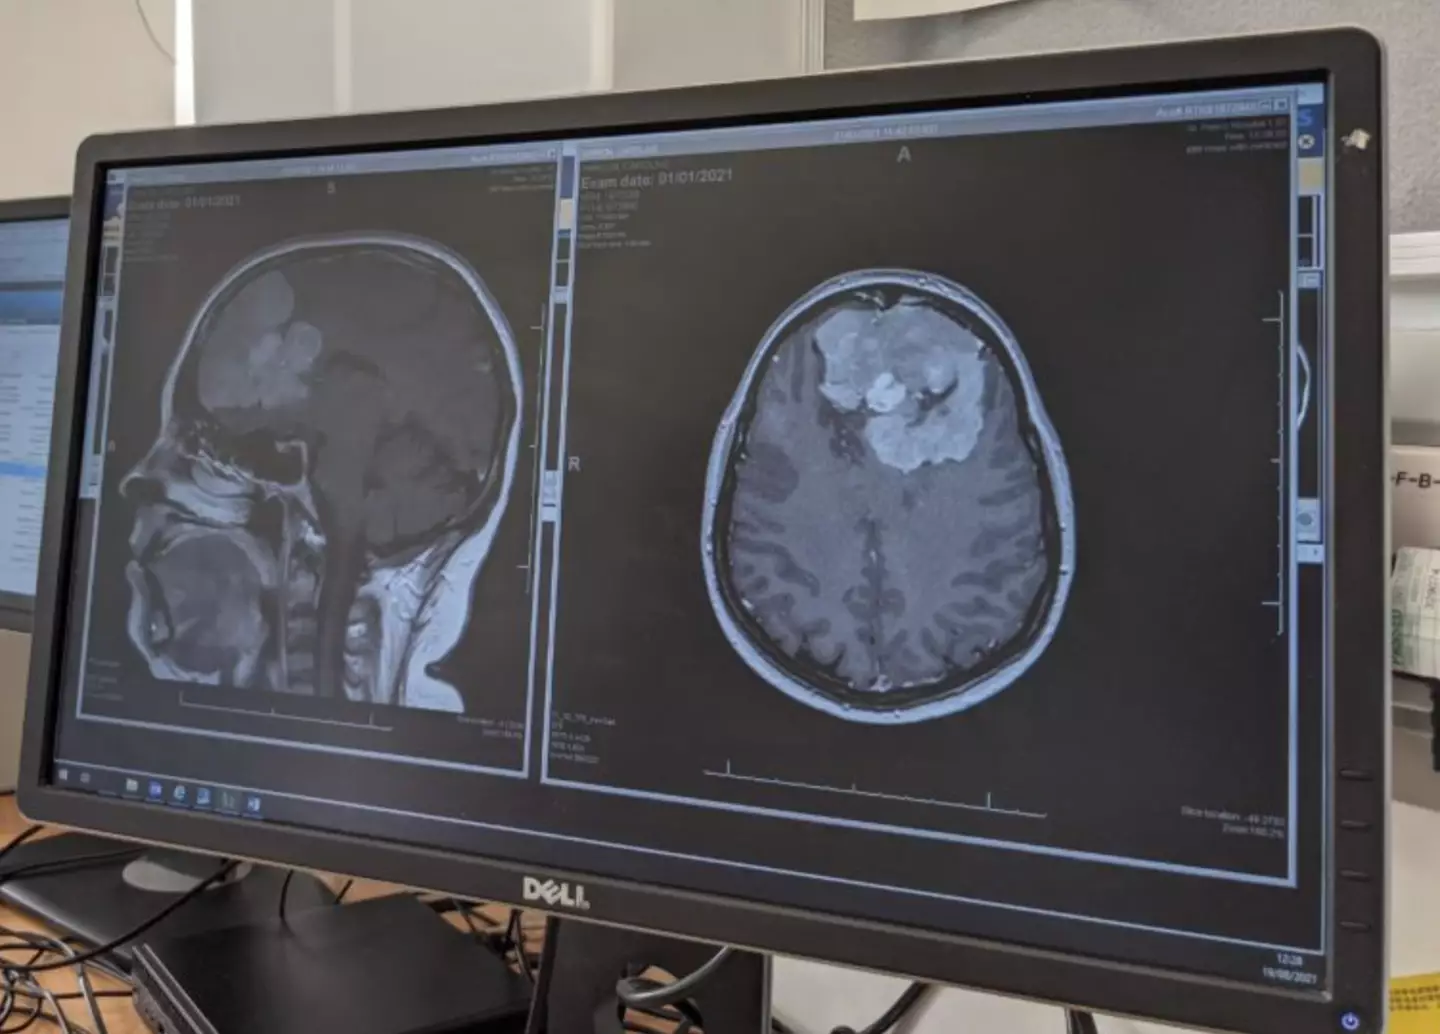 They found a tumour following the CT scan. (St. George's Hospital)